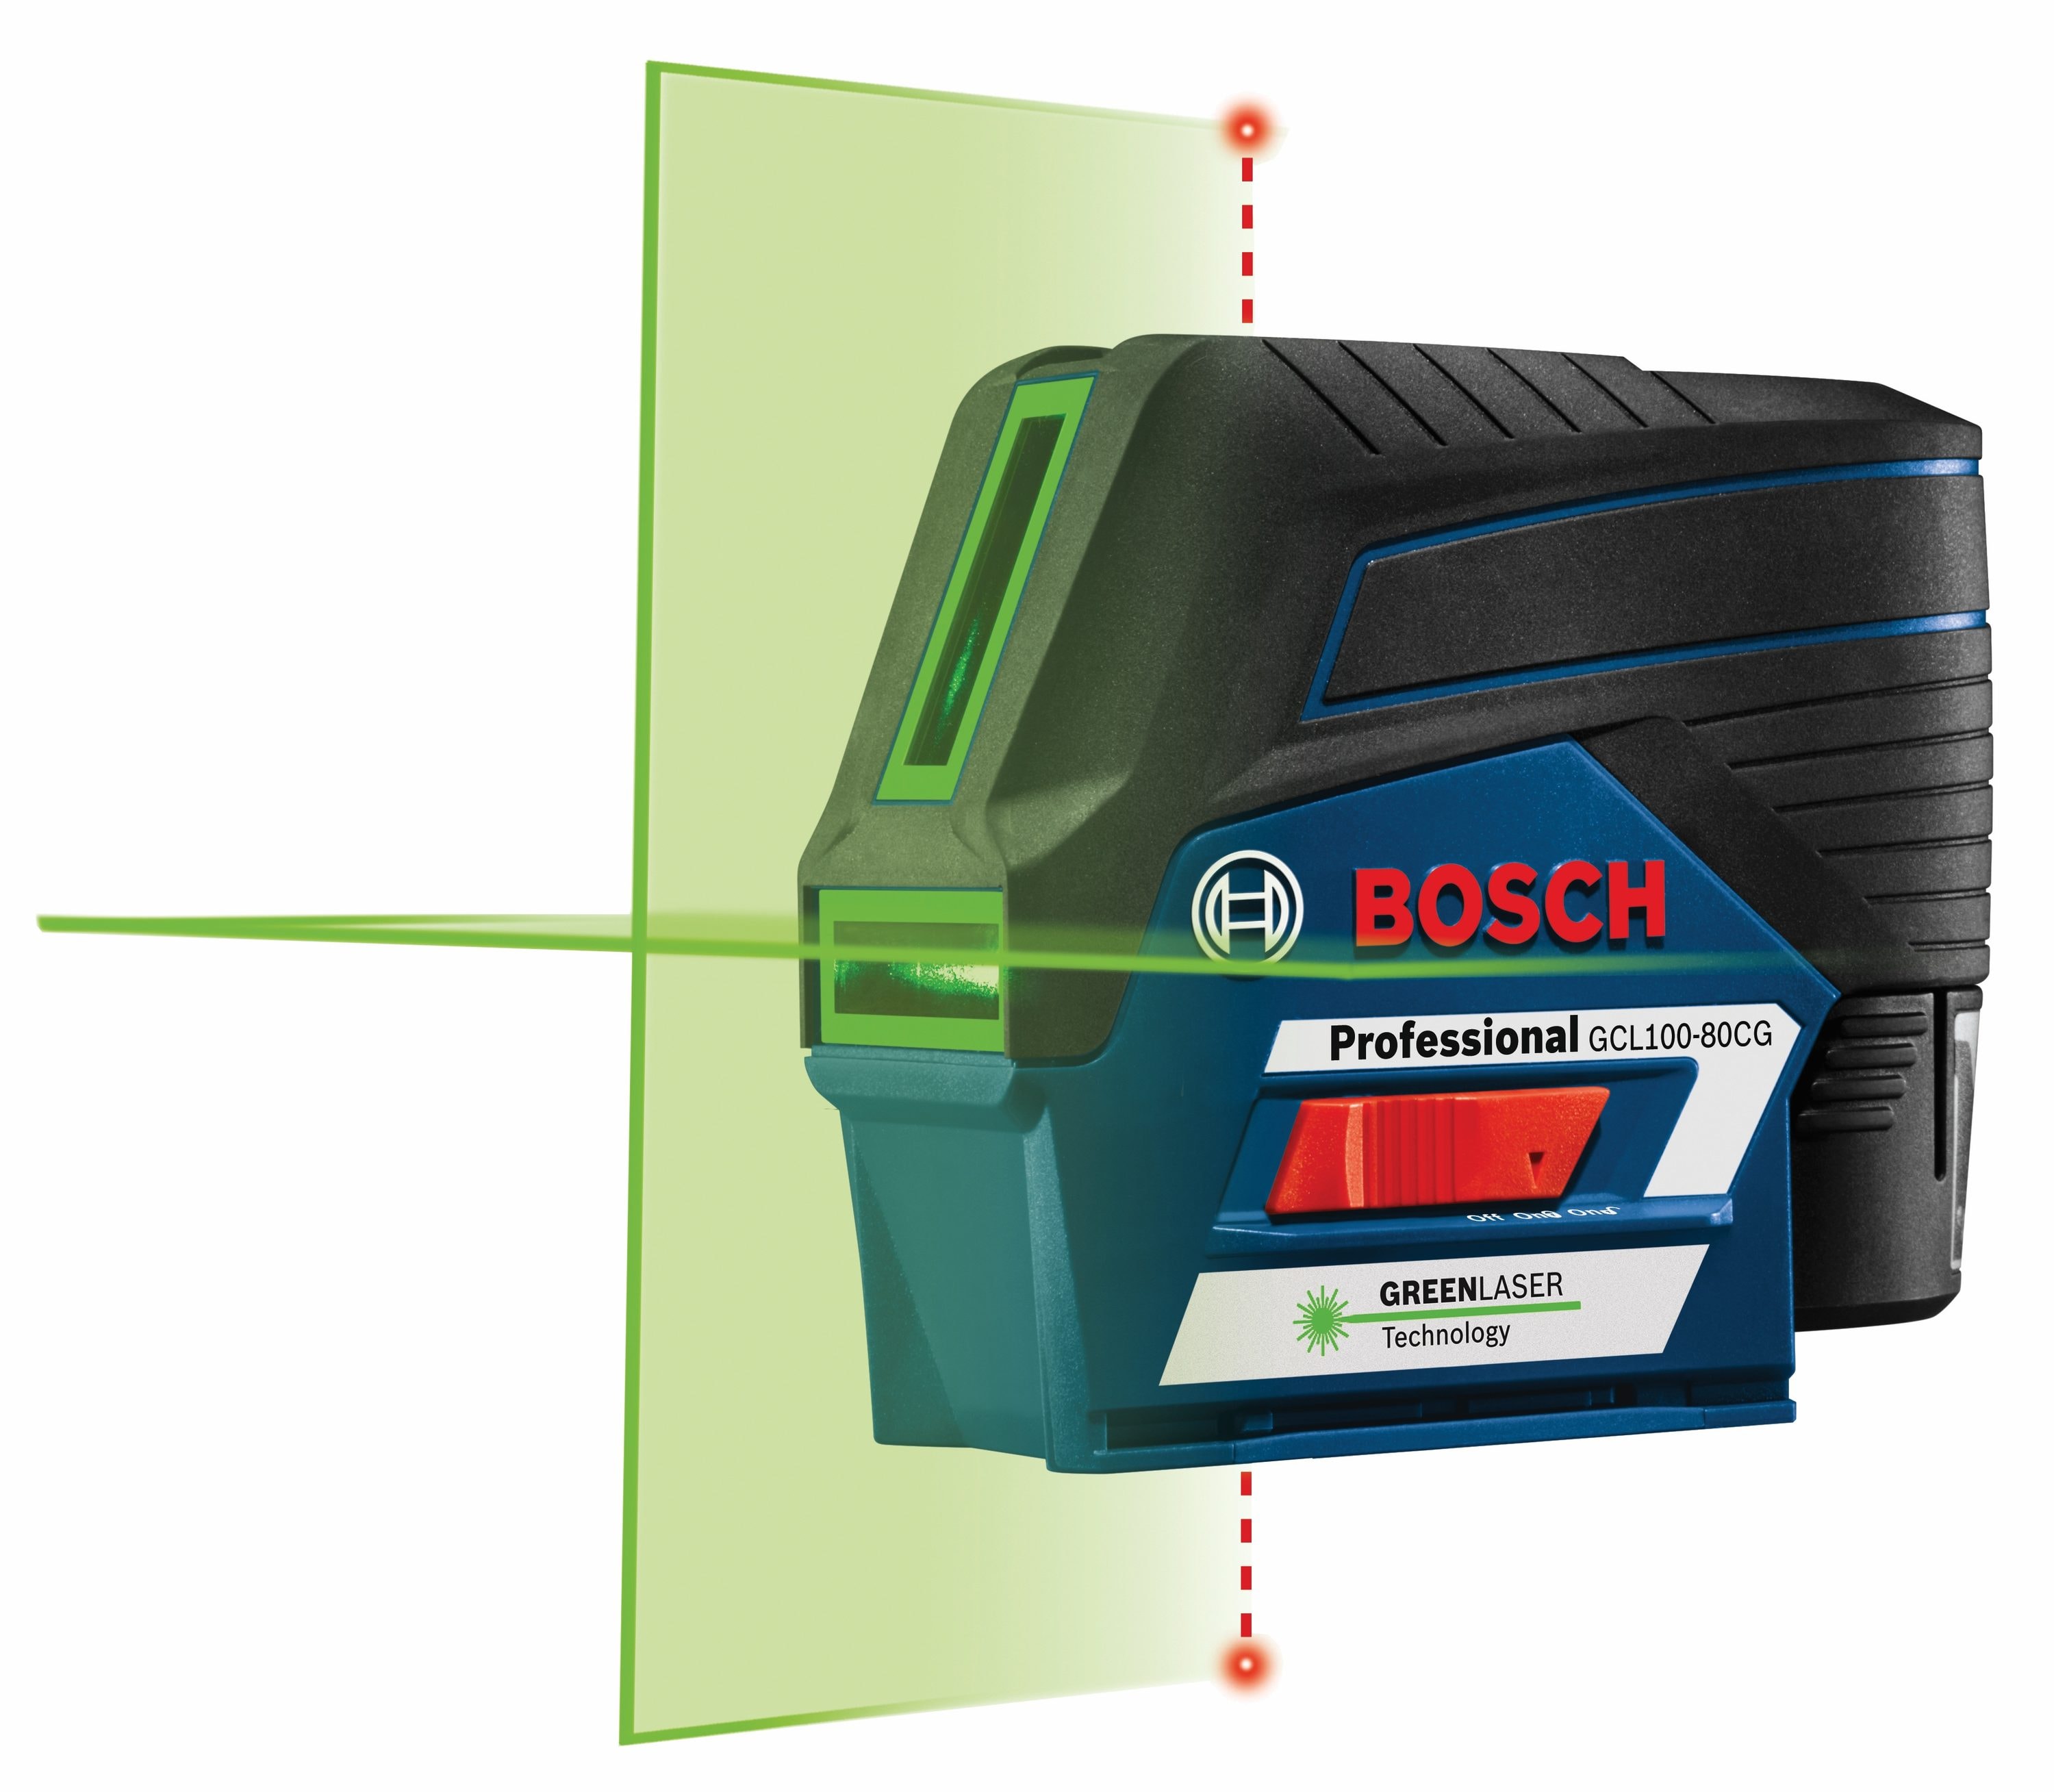 How to use a Bosch Laser Level